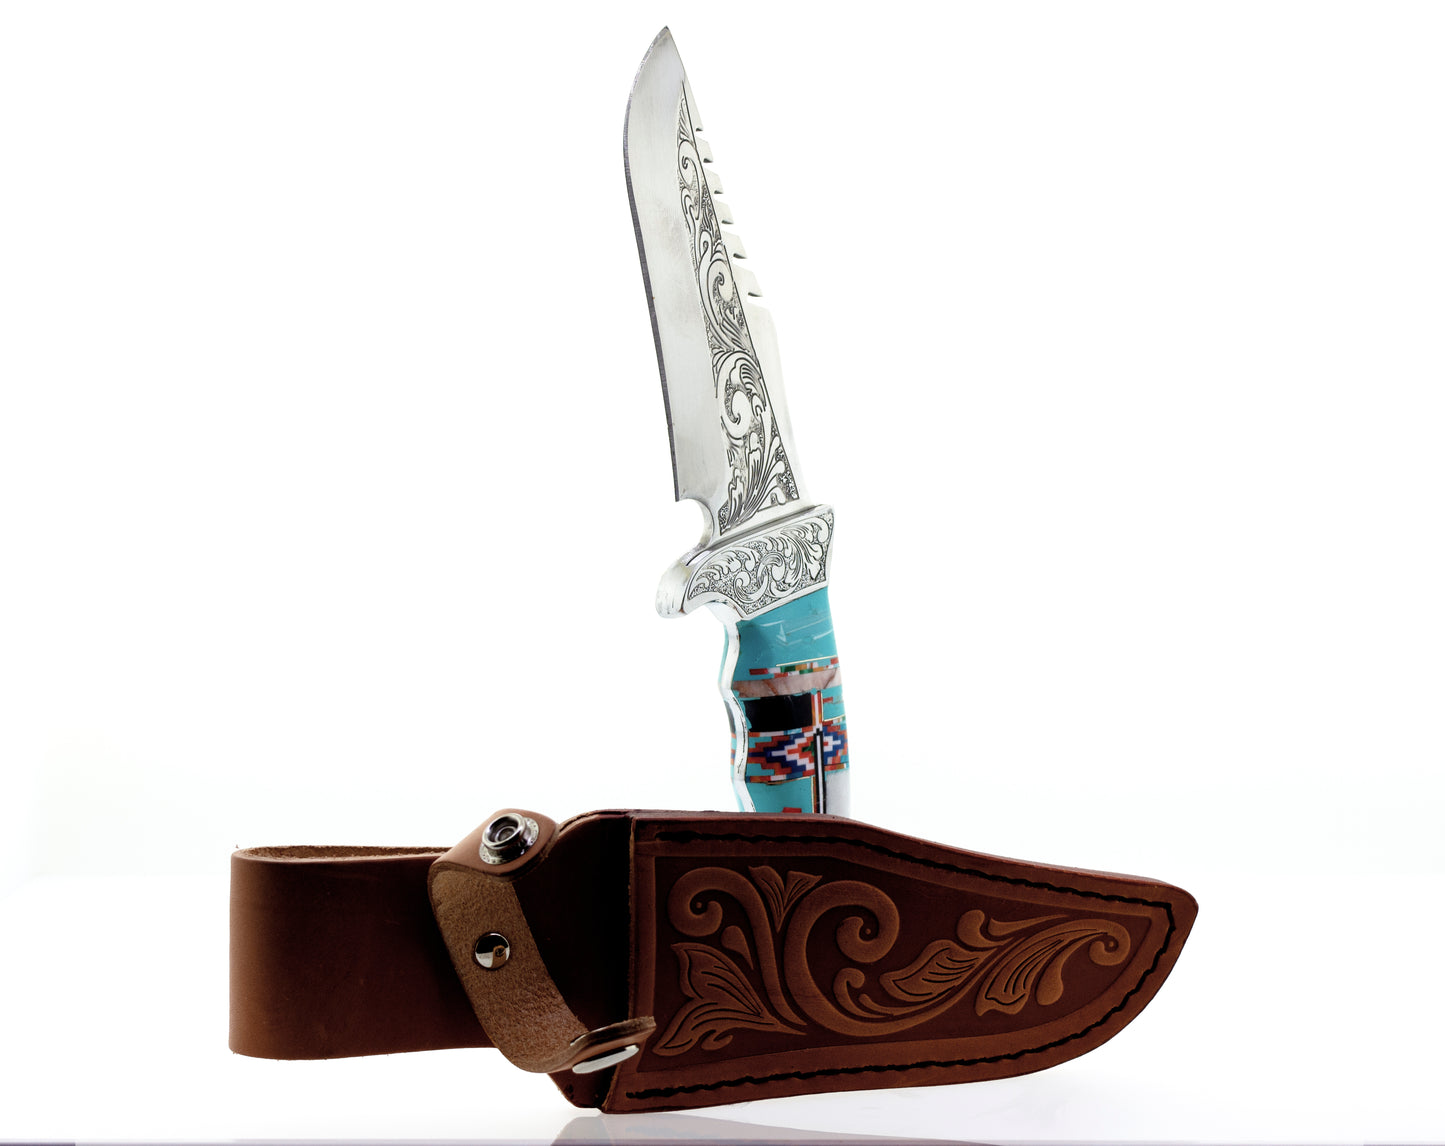 A Stunning Handcrafted Knife With Inlaid Stone Handle on a white background.